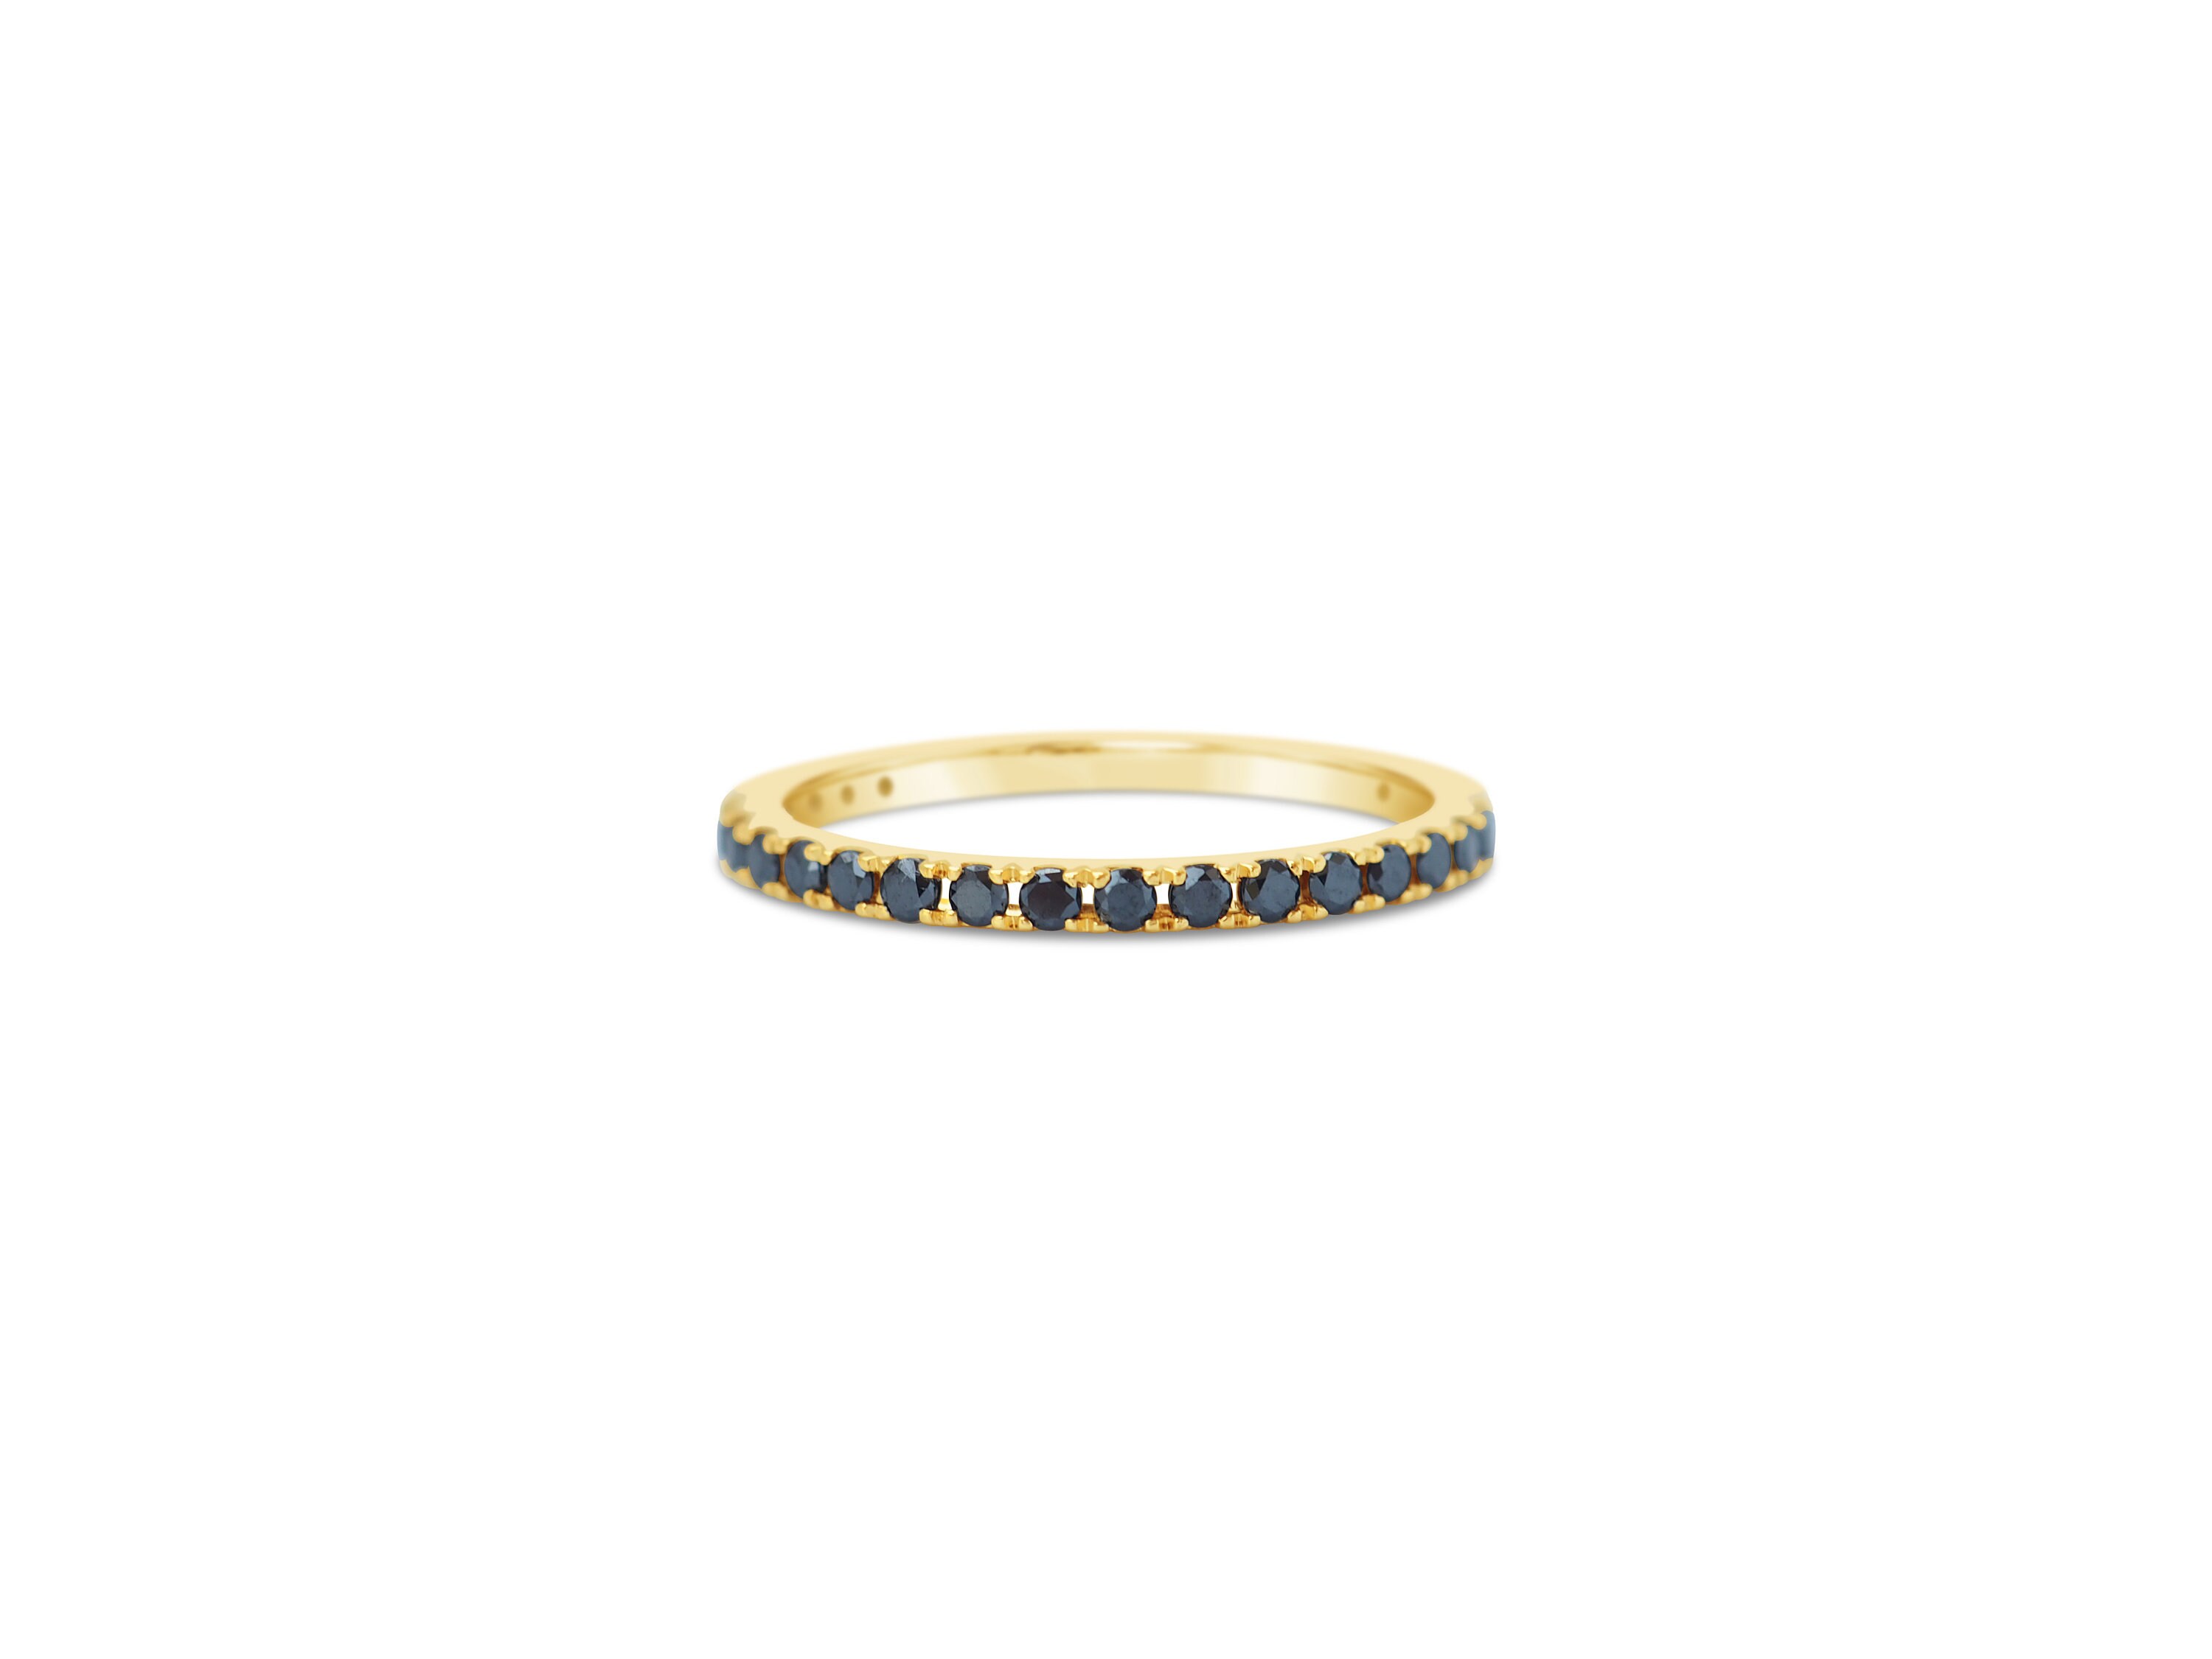 Ready To Ship . Black Diamond Eternity Ring 18K Yellow Gold 3/4 Us 5.5 To 7.5 Natural Band 1.6mm Wedding